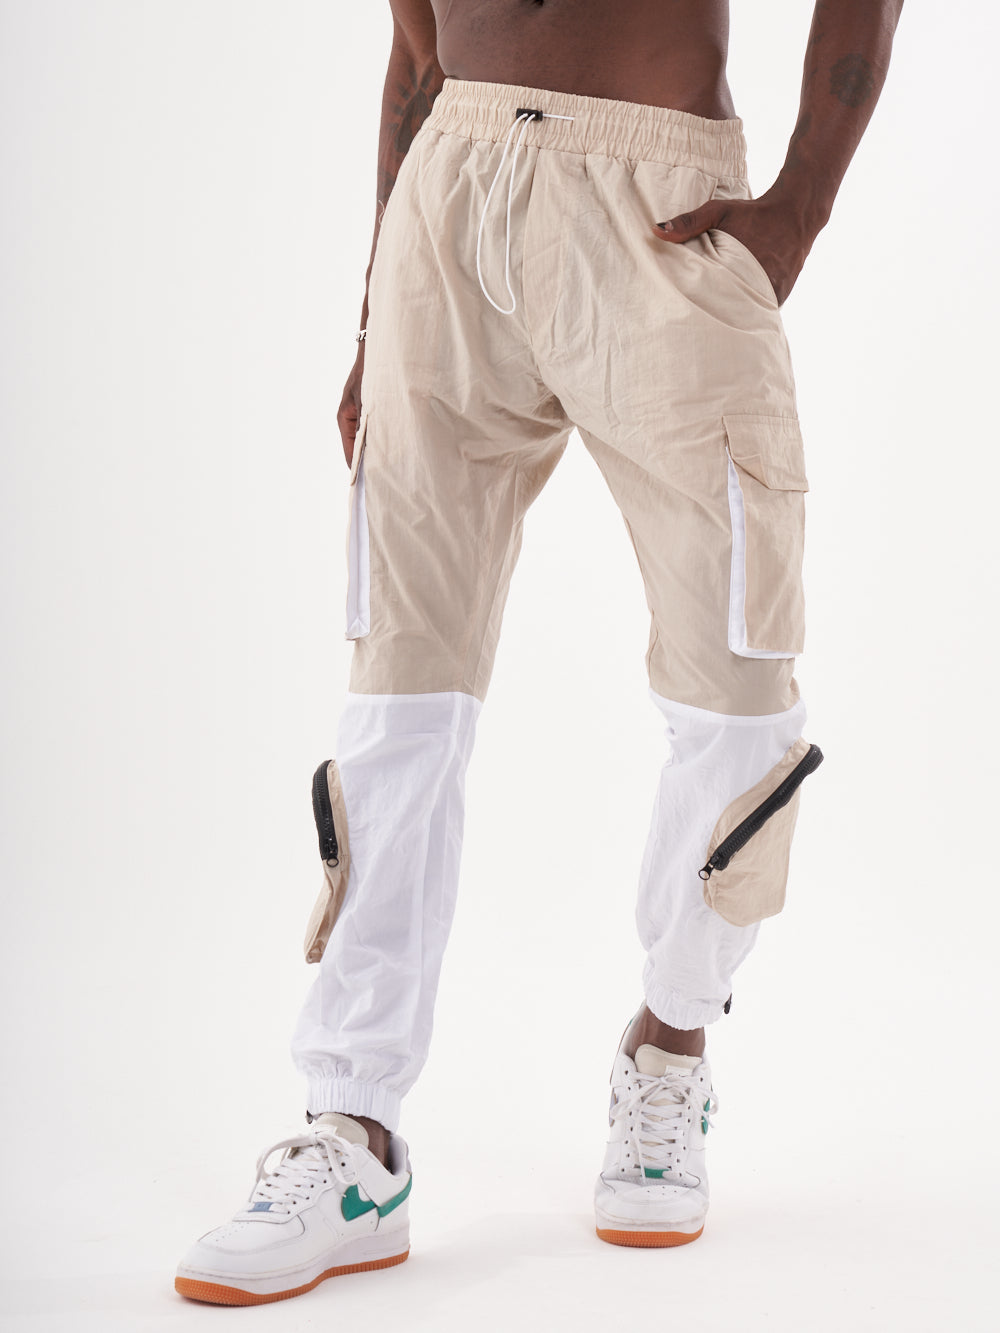 A man wearing RENEGADE | BEIGE cargo pants and white sneakers.